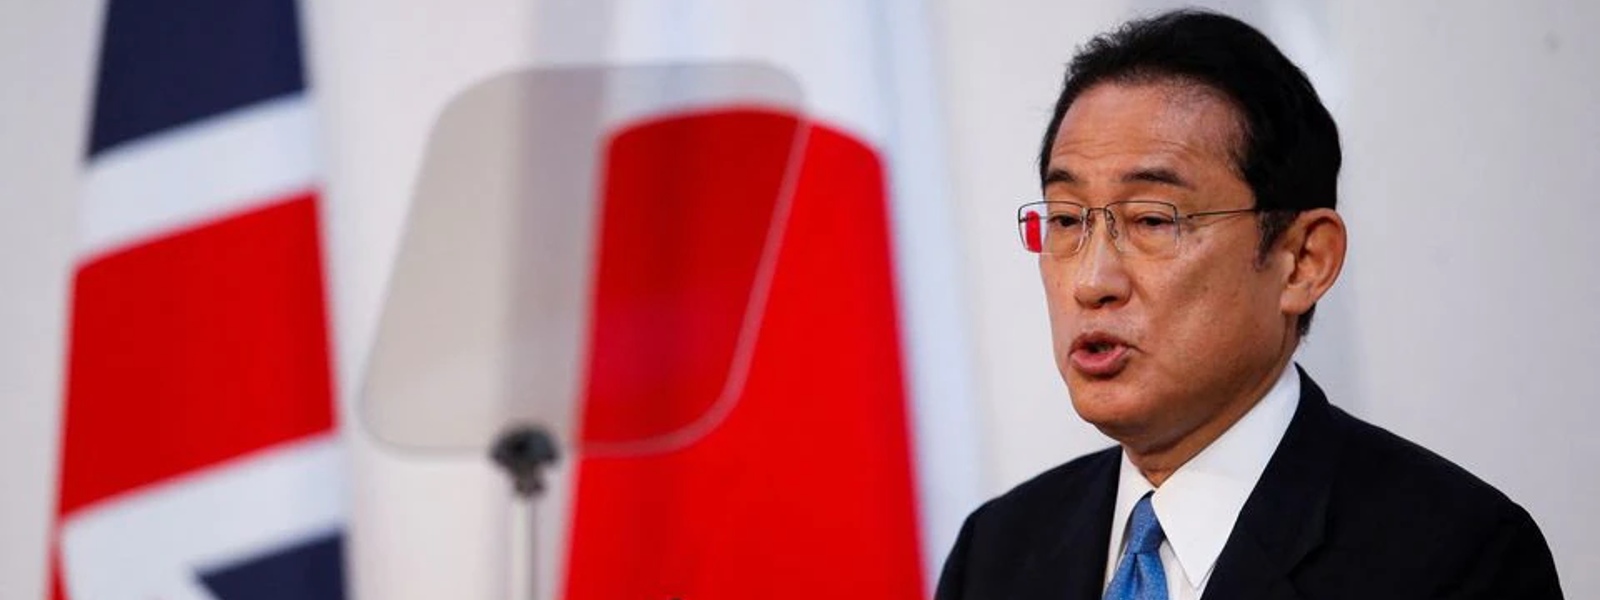 Japan to ban Russian oil imports ‘in principle,’ prime minister says